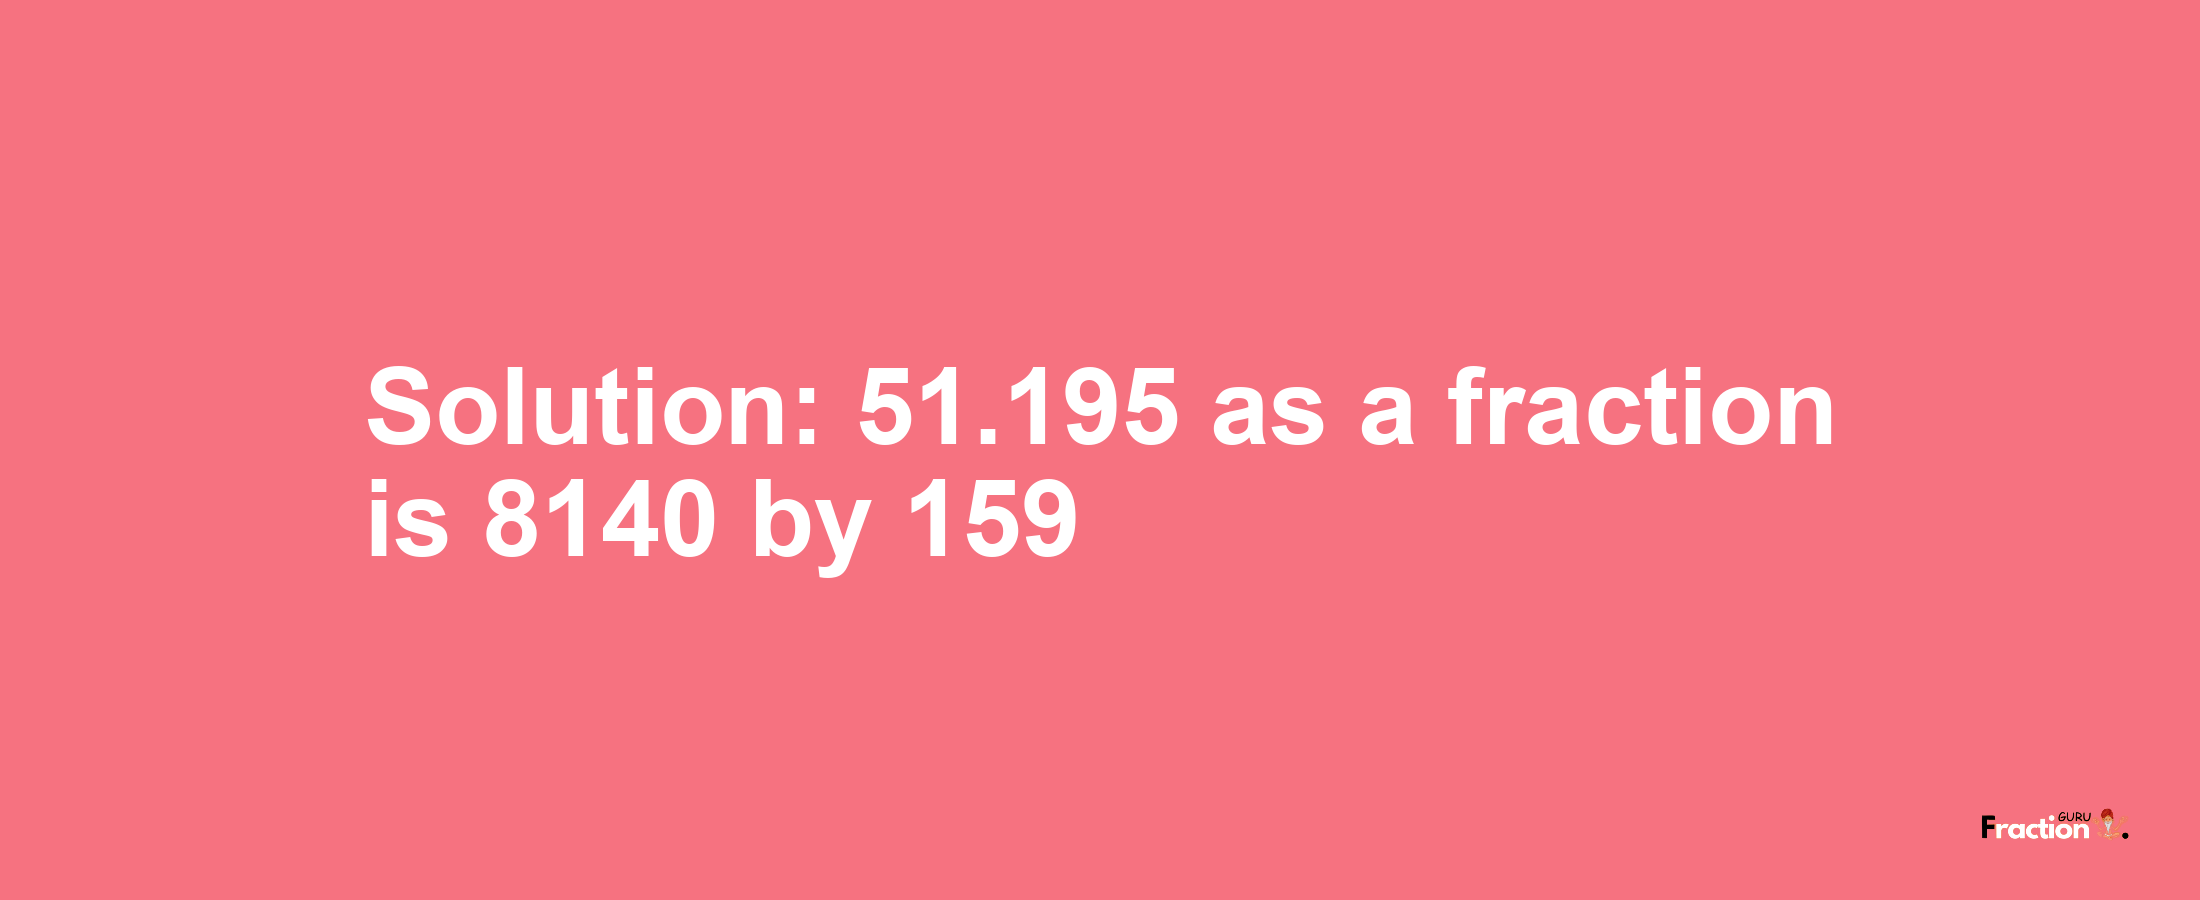 Solution:51.195 as a fraction is 8140/159